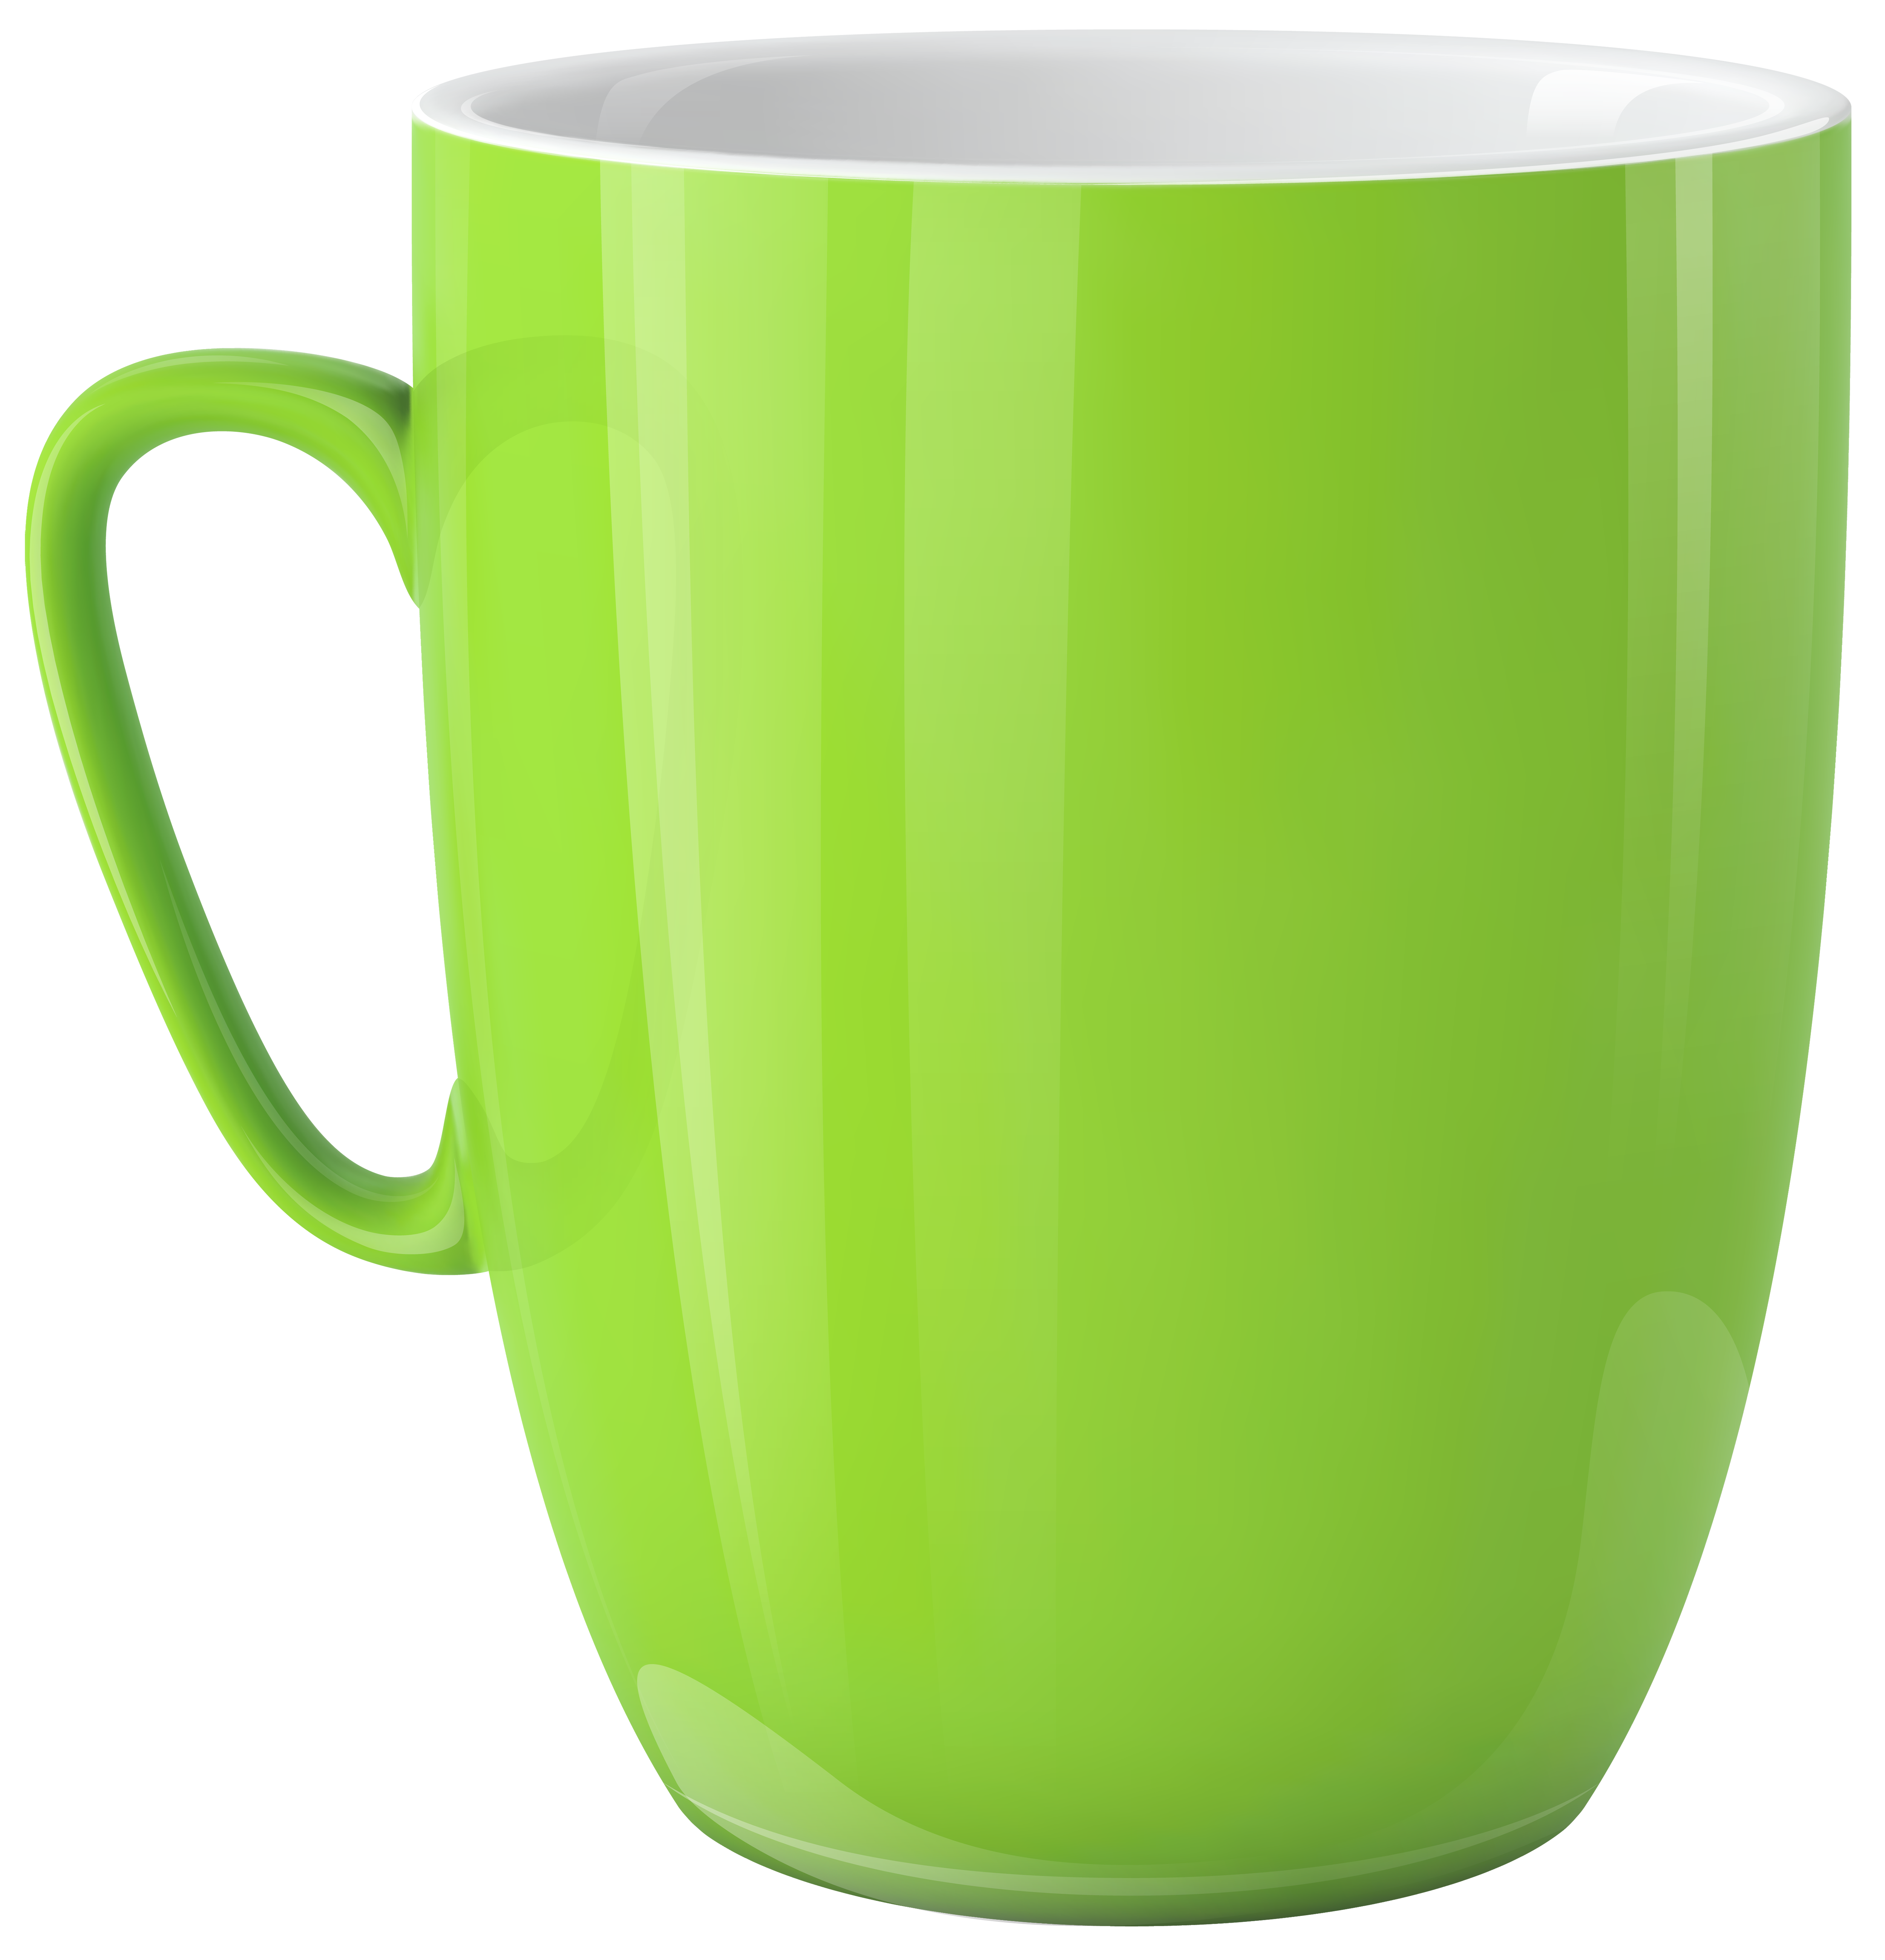 clipart cup yellow cup